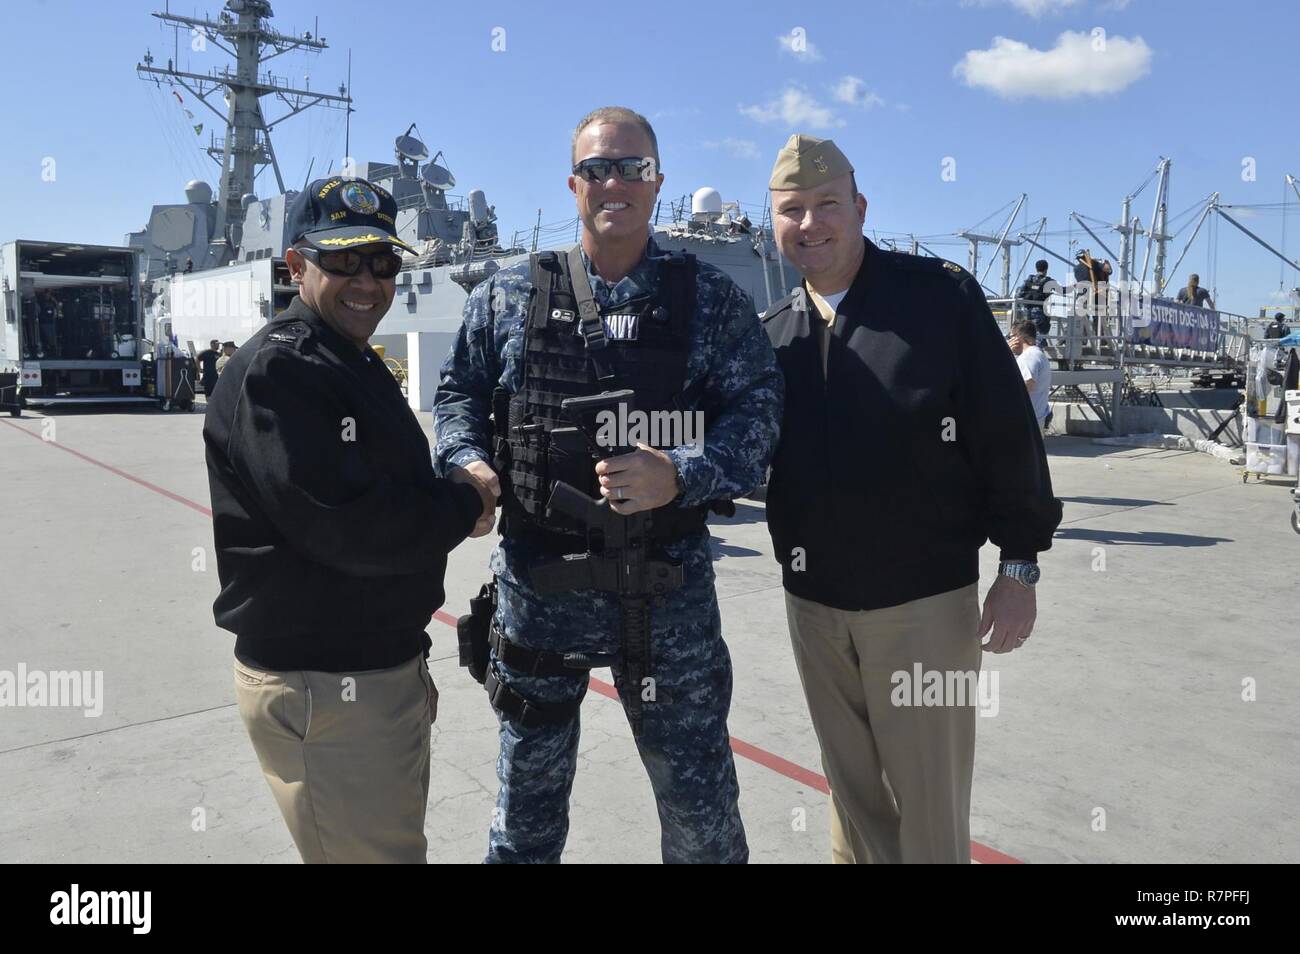 SAN DIEGO (March 23, 2017) Naval Base San Diego Commanding Officer Capt. Roy Love, left, and Command Master Chief Matt Ruane greet actor Adam Baldwin prior to the filming of the television show 'The Last Ship'. Stock Photo